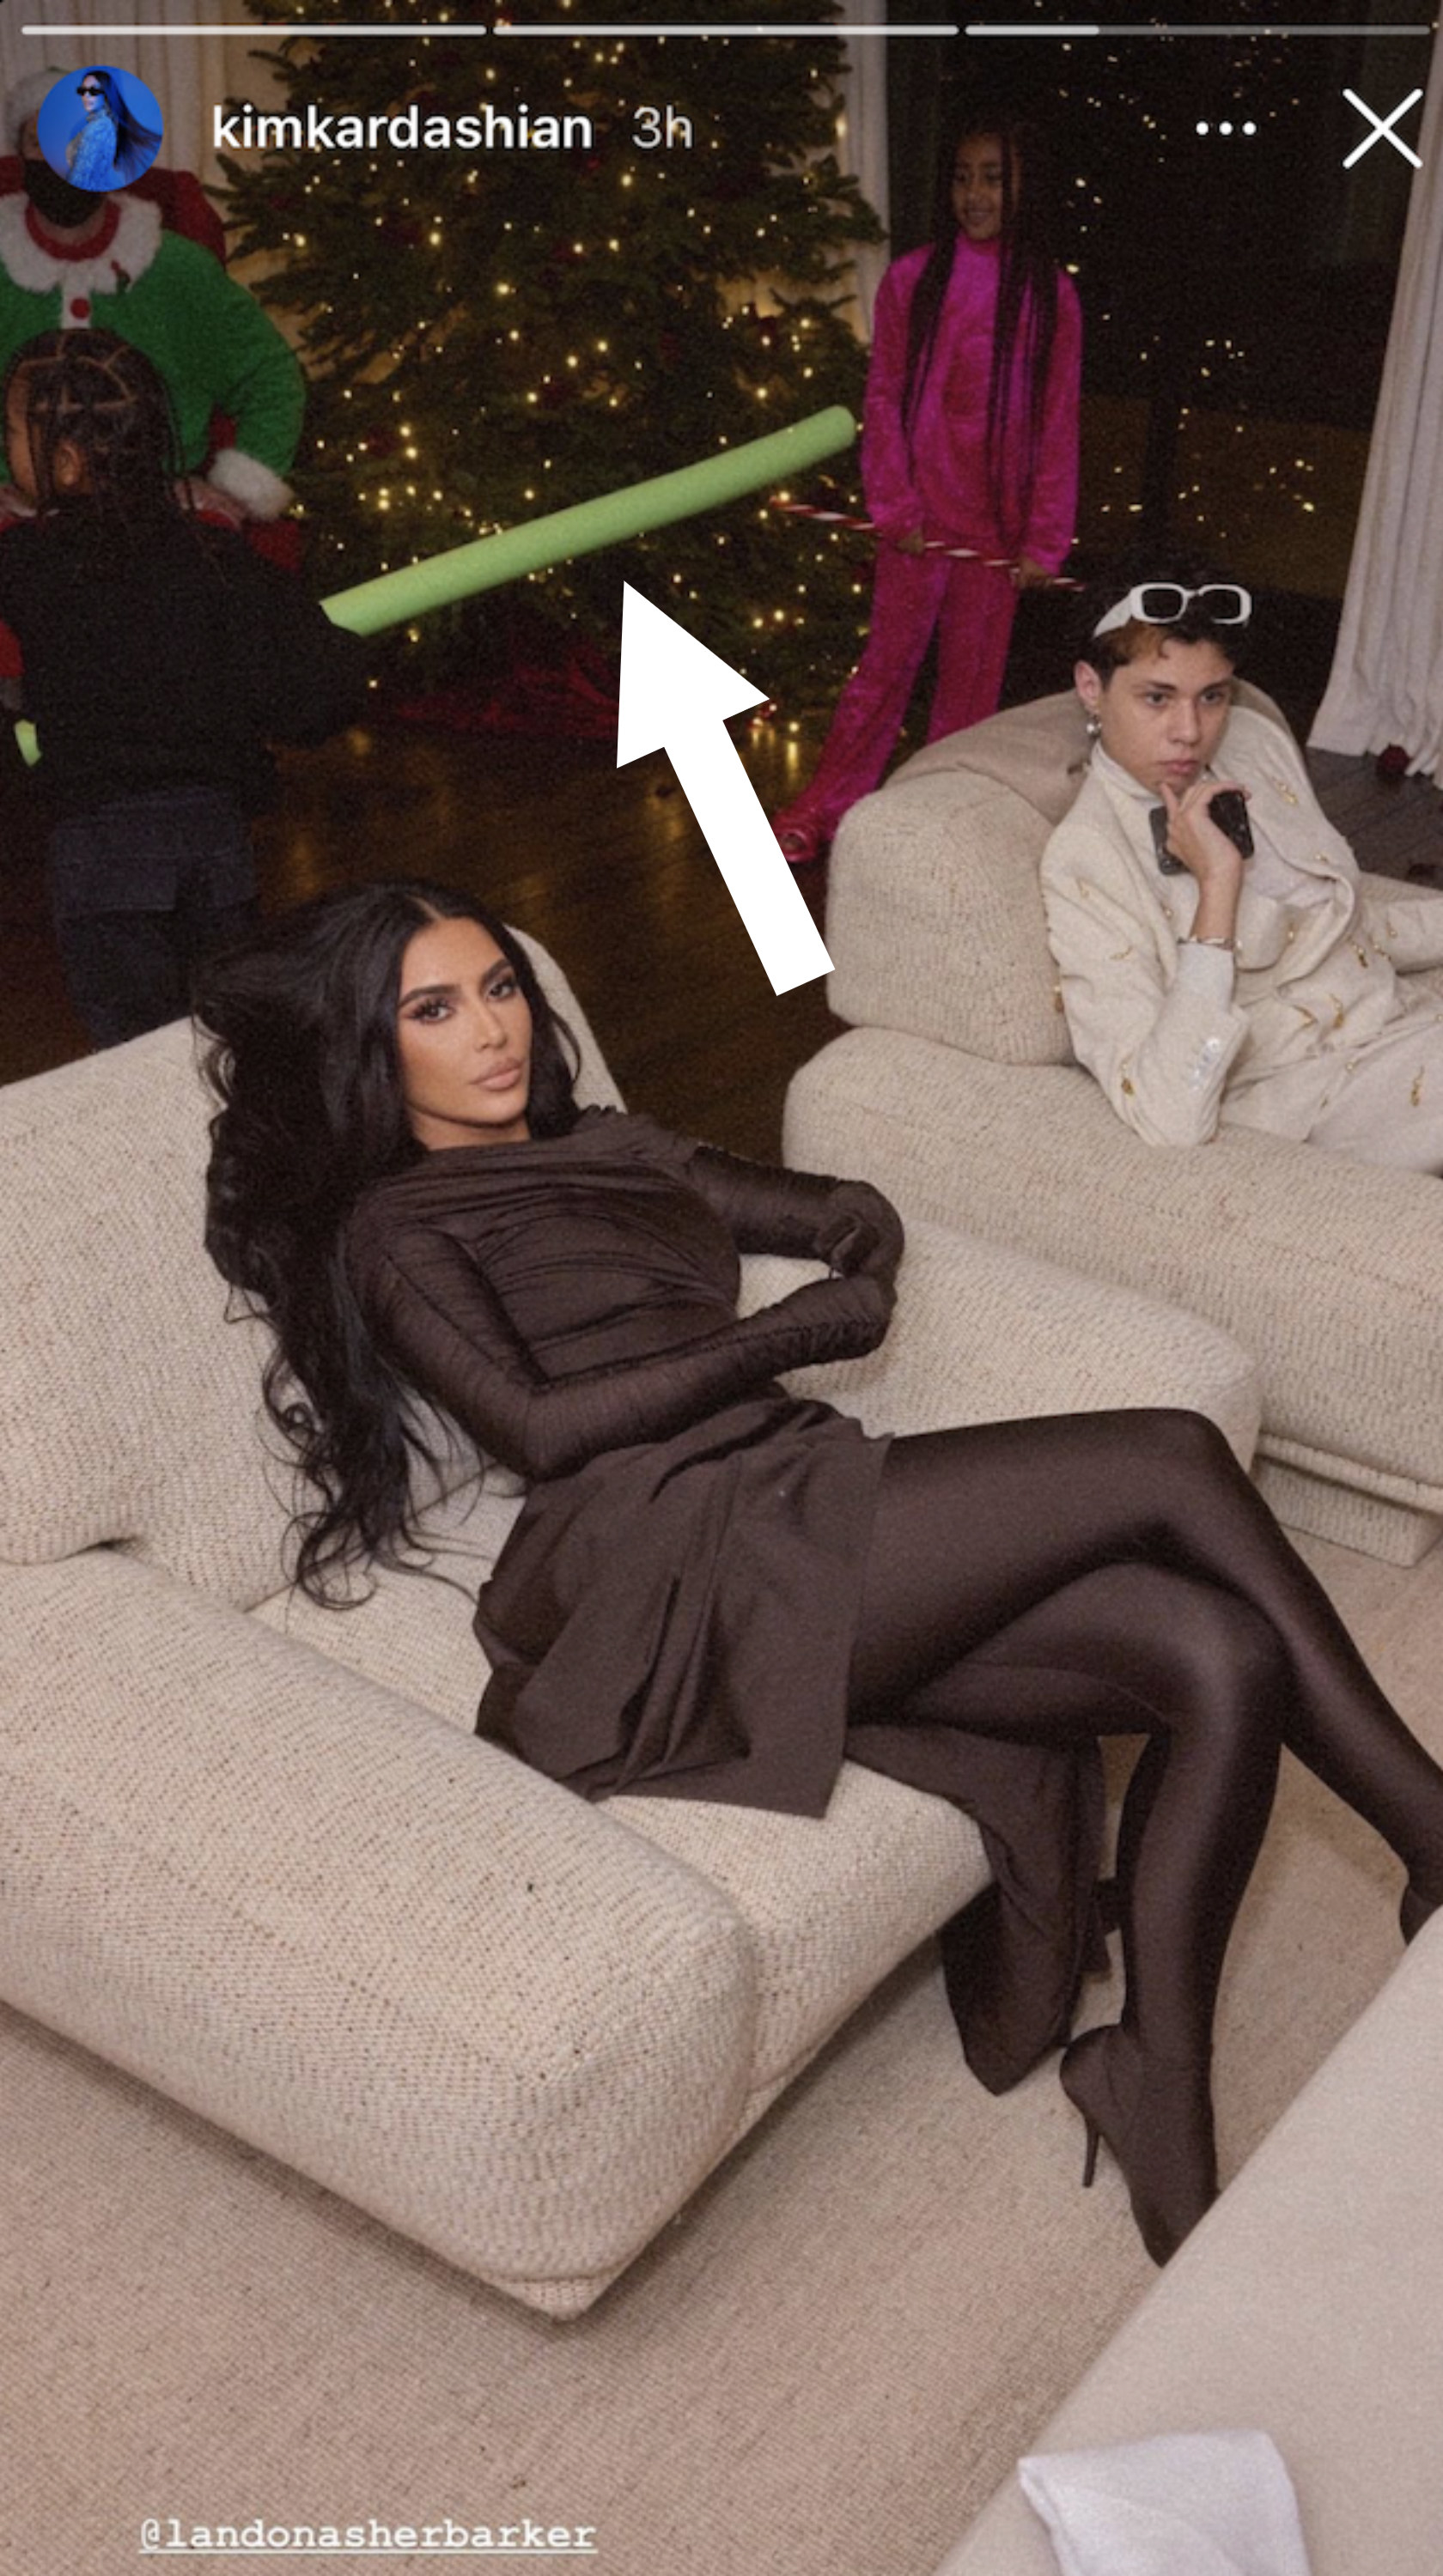 Kim and Landon Barker lounging on individual couches next to each other